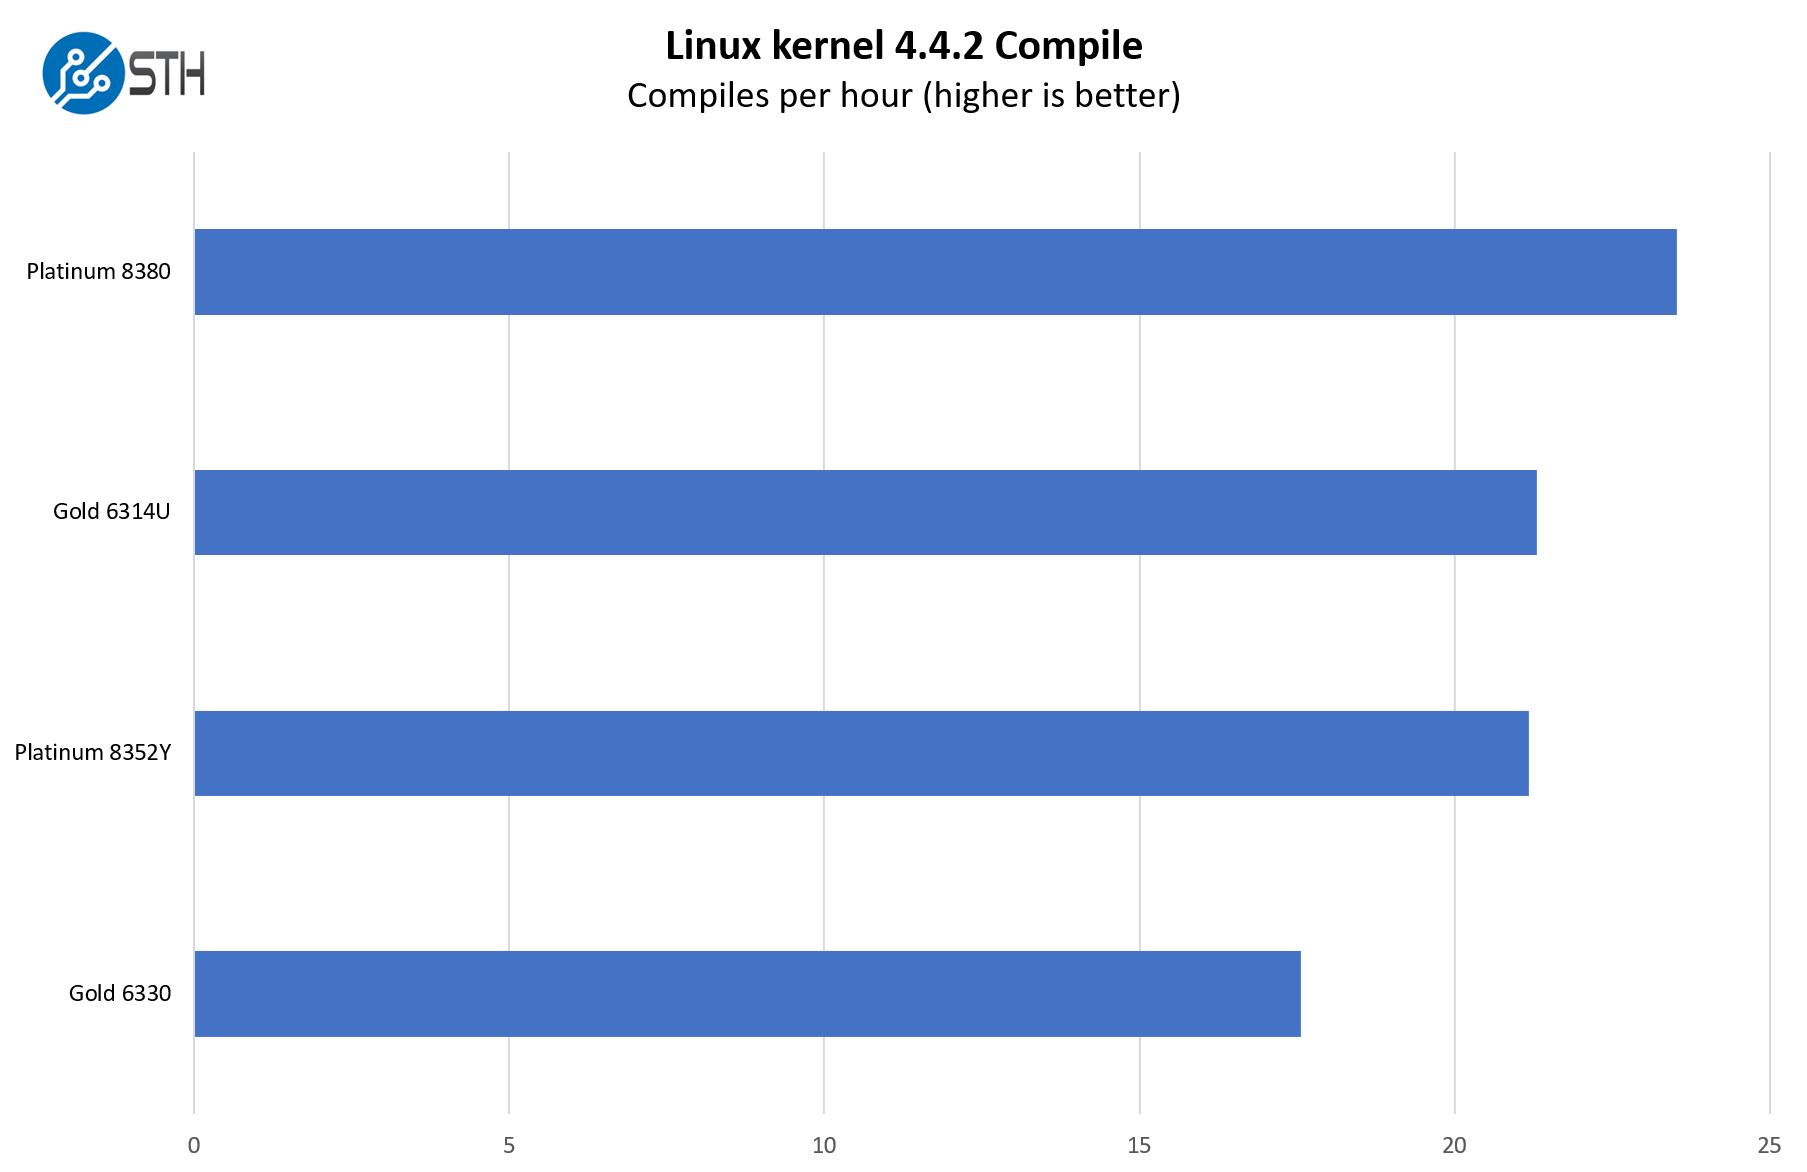 Supermicro SYS 510P WTR Linux Kernel Compile Benchmark